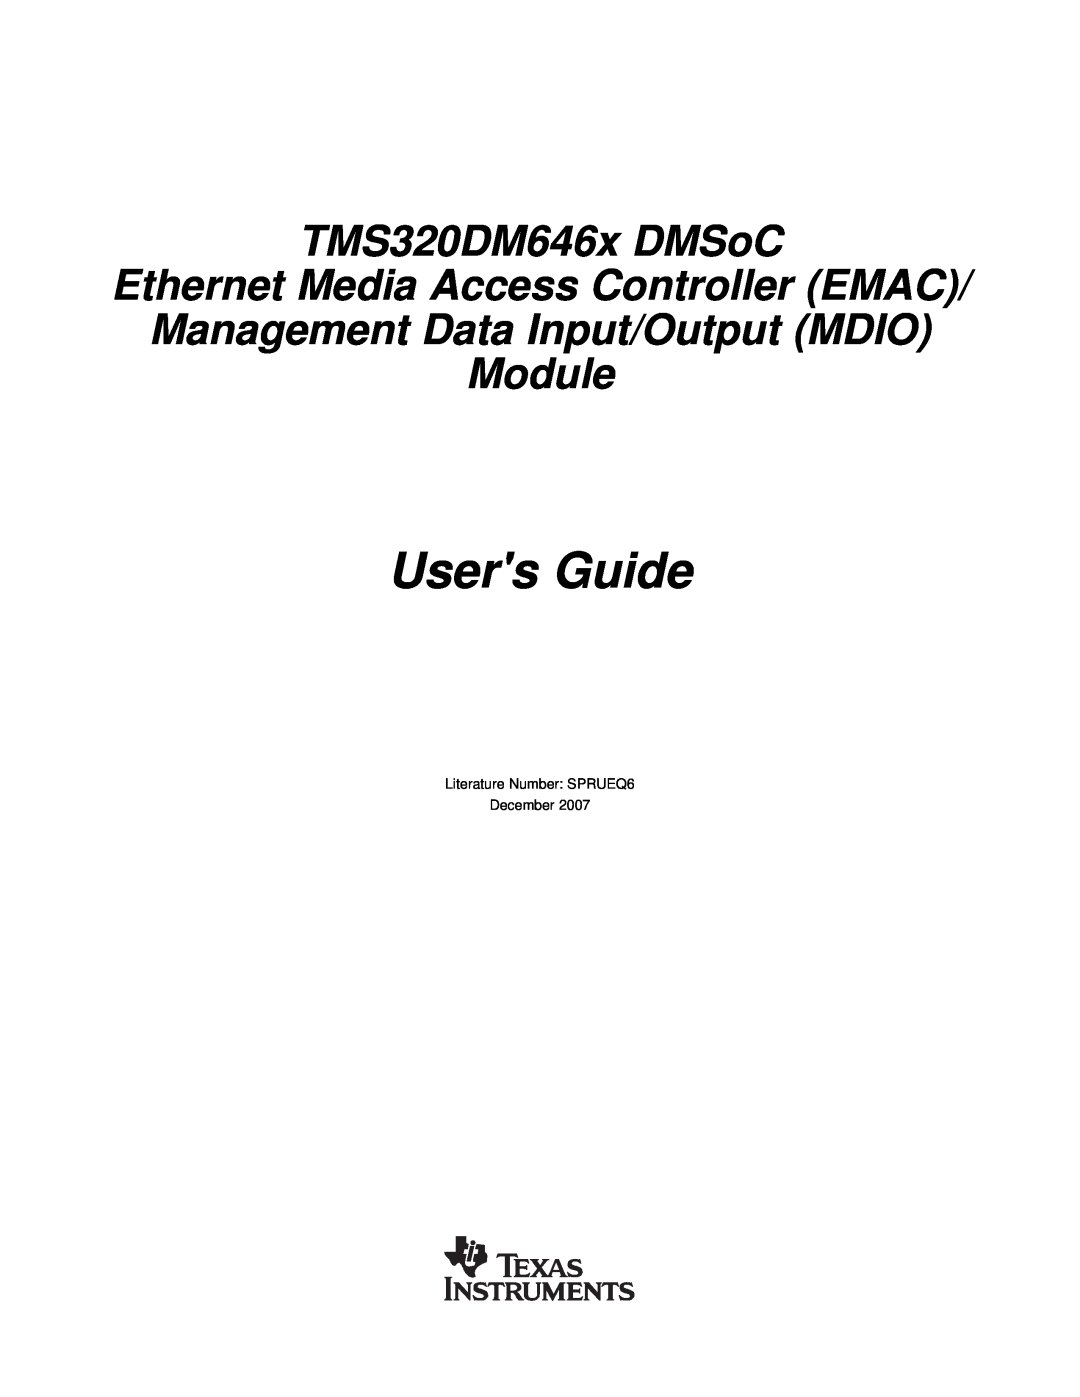 Texas Instruments manual Users Guide, TMS320DM646x DMSoC Ethernet Media Access Controller EMAC 